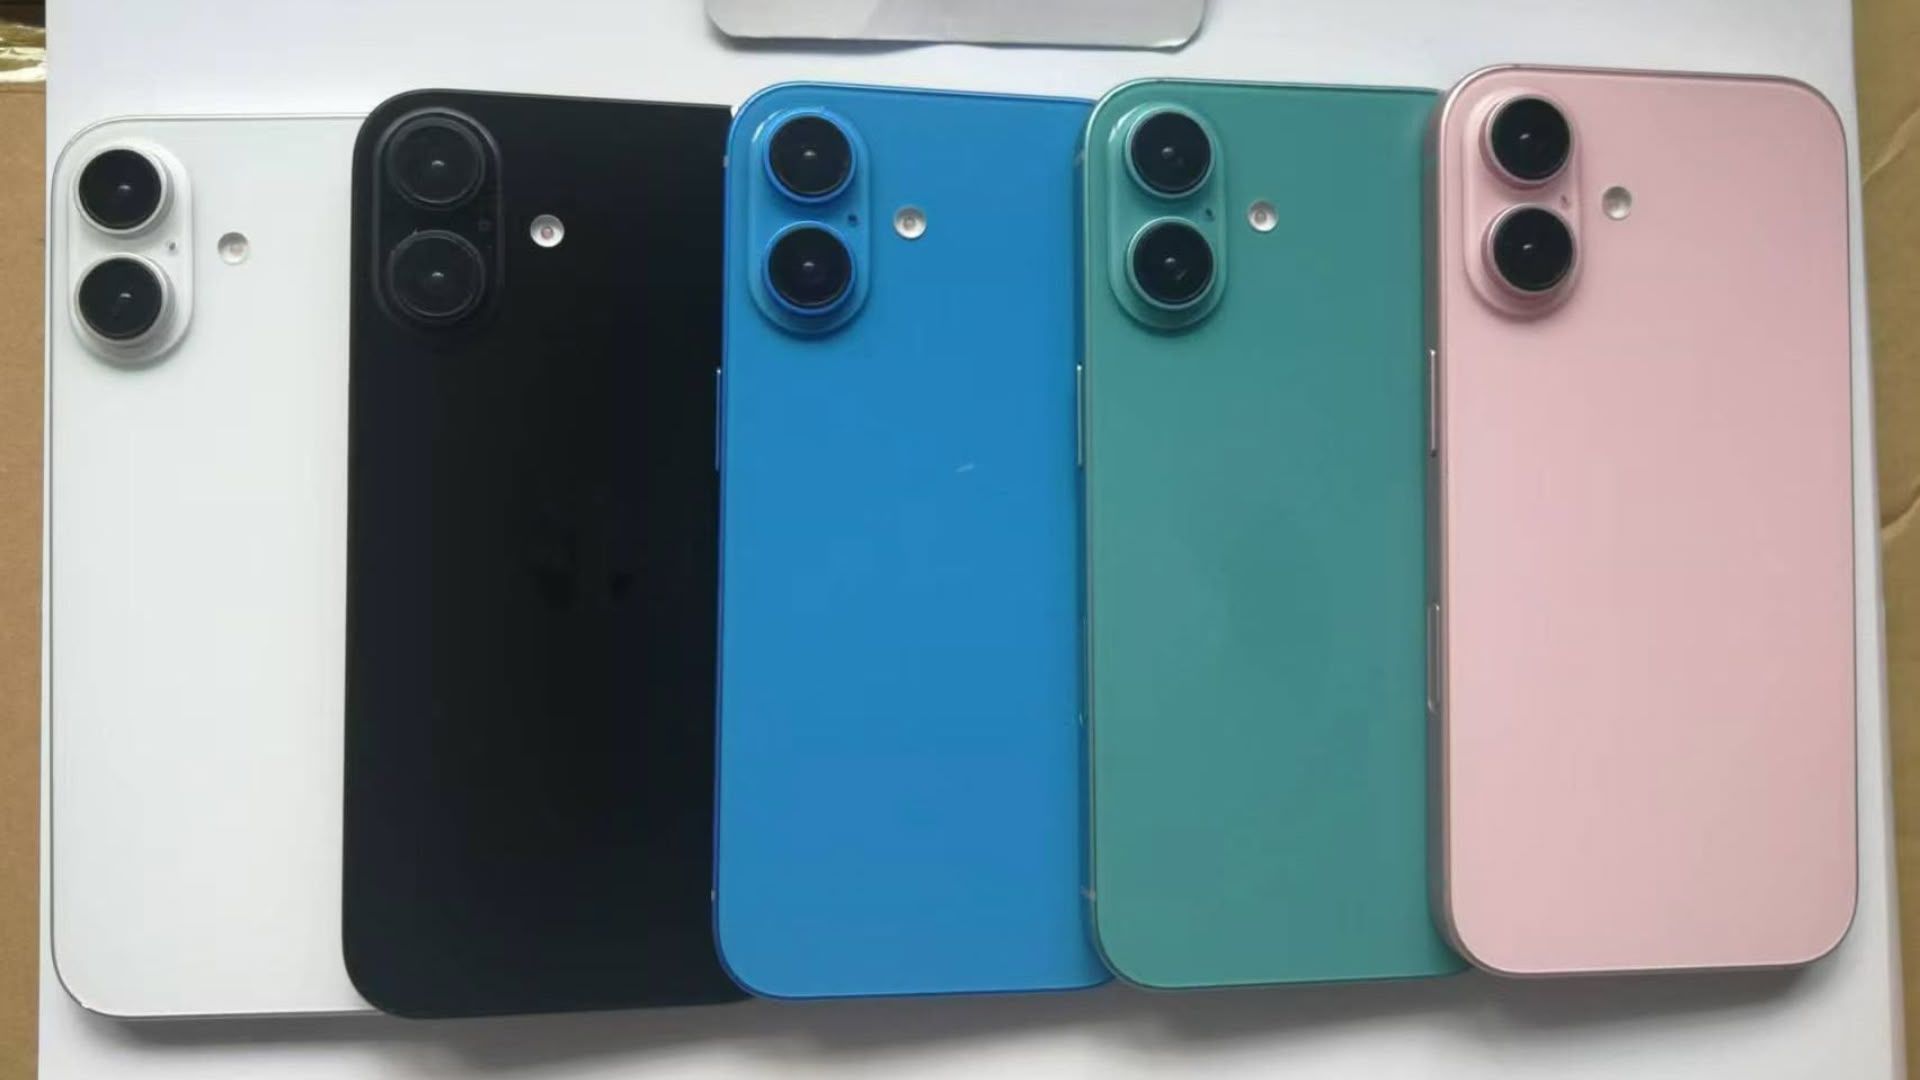 Revealed: iPhone 16 Colors and Redesigned Camera in Leaked Image